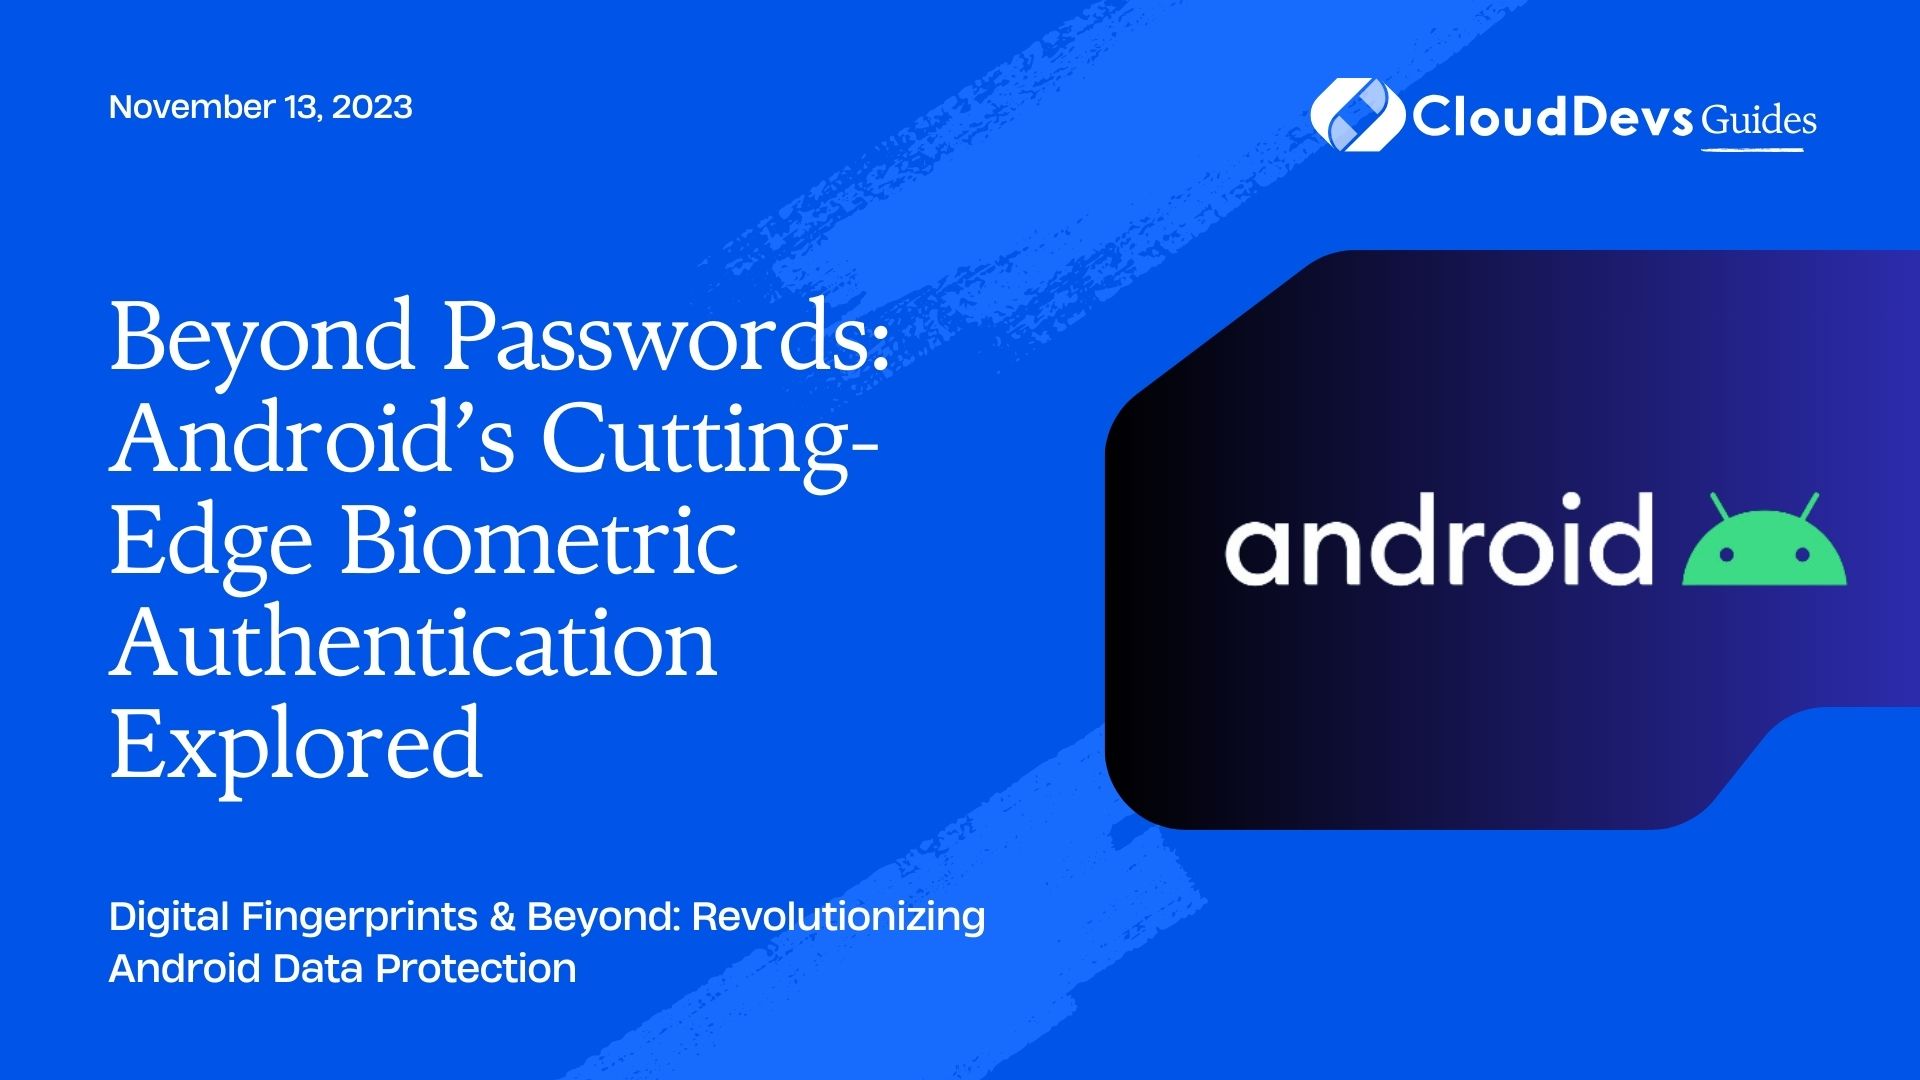 Beyond Passwords: Android’s Cutting-Edge Biometric Authentication Explored